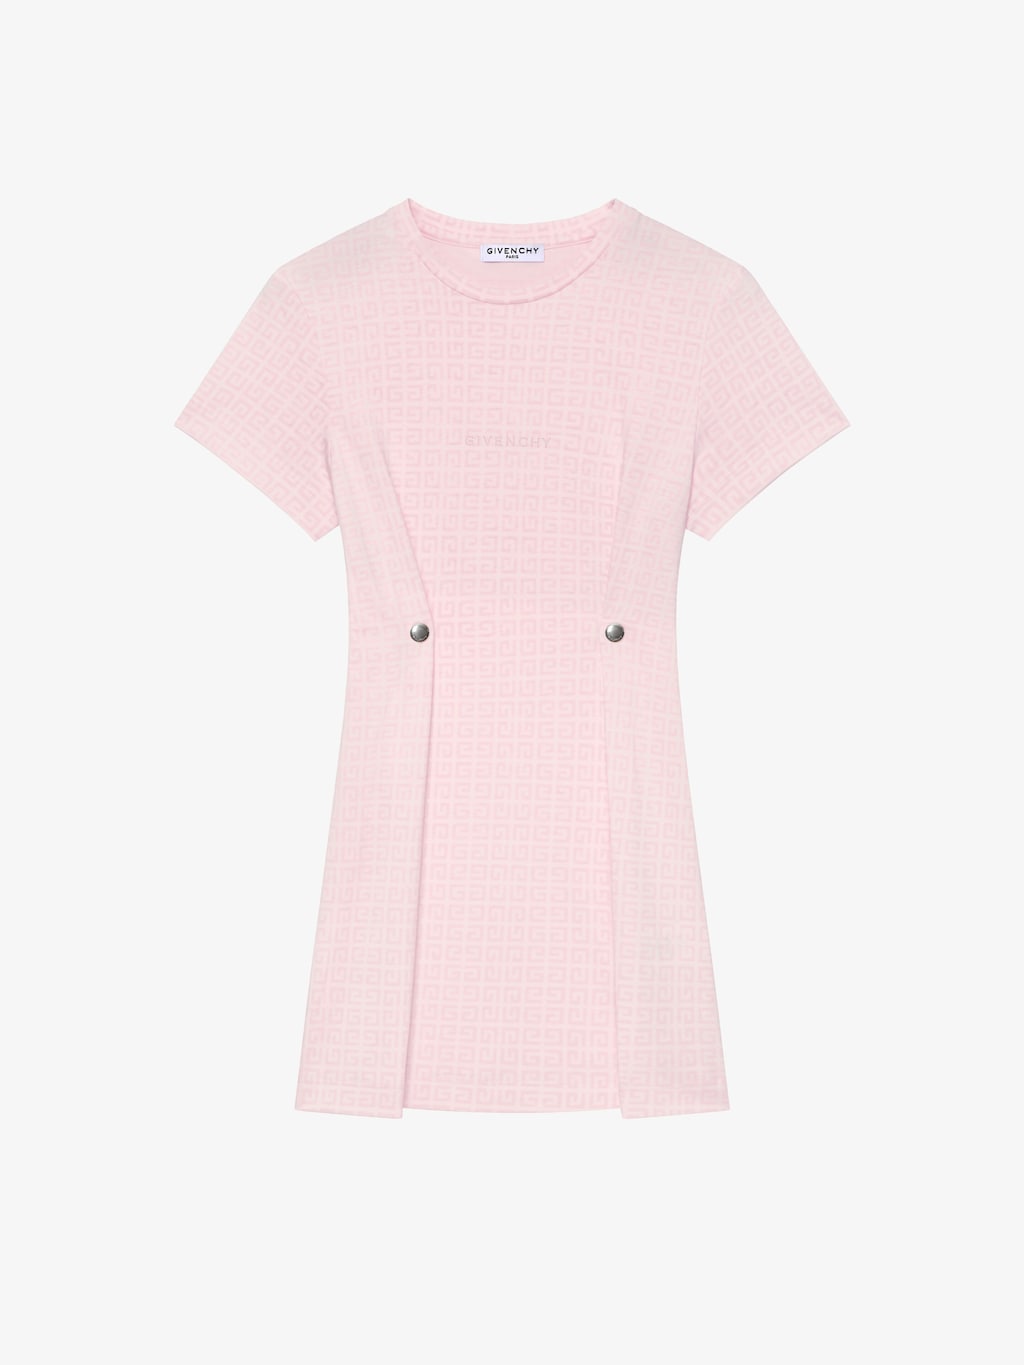 givenchy.com | T-shirt dress in 4G jersey with GIVENCHY signature